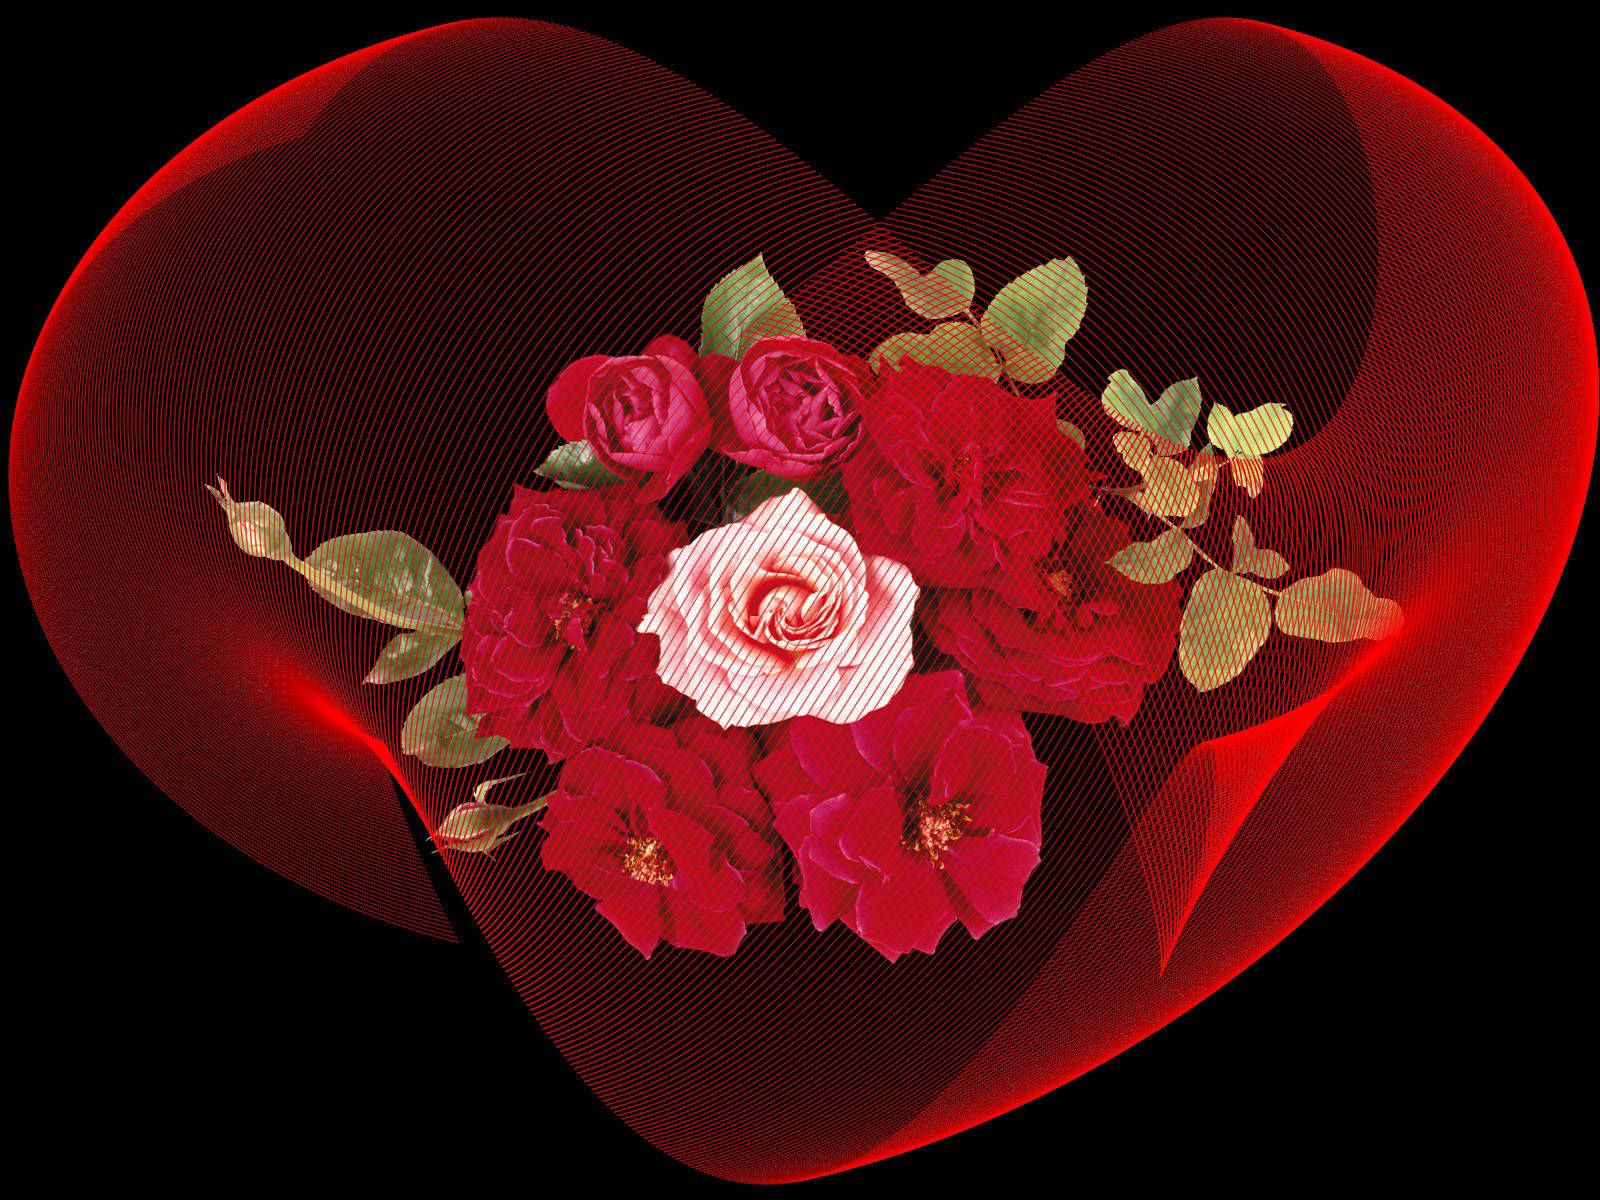 A Red Heart Shaped Flower Background